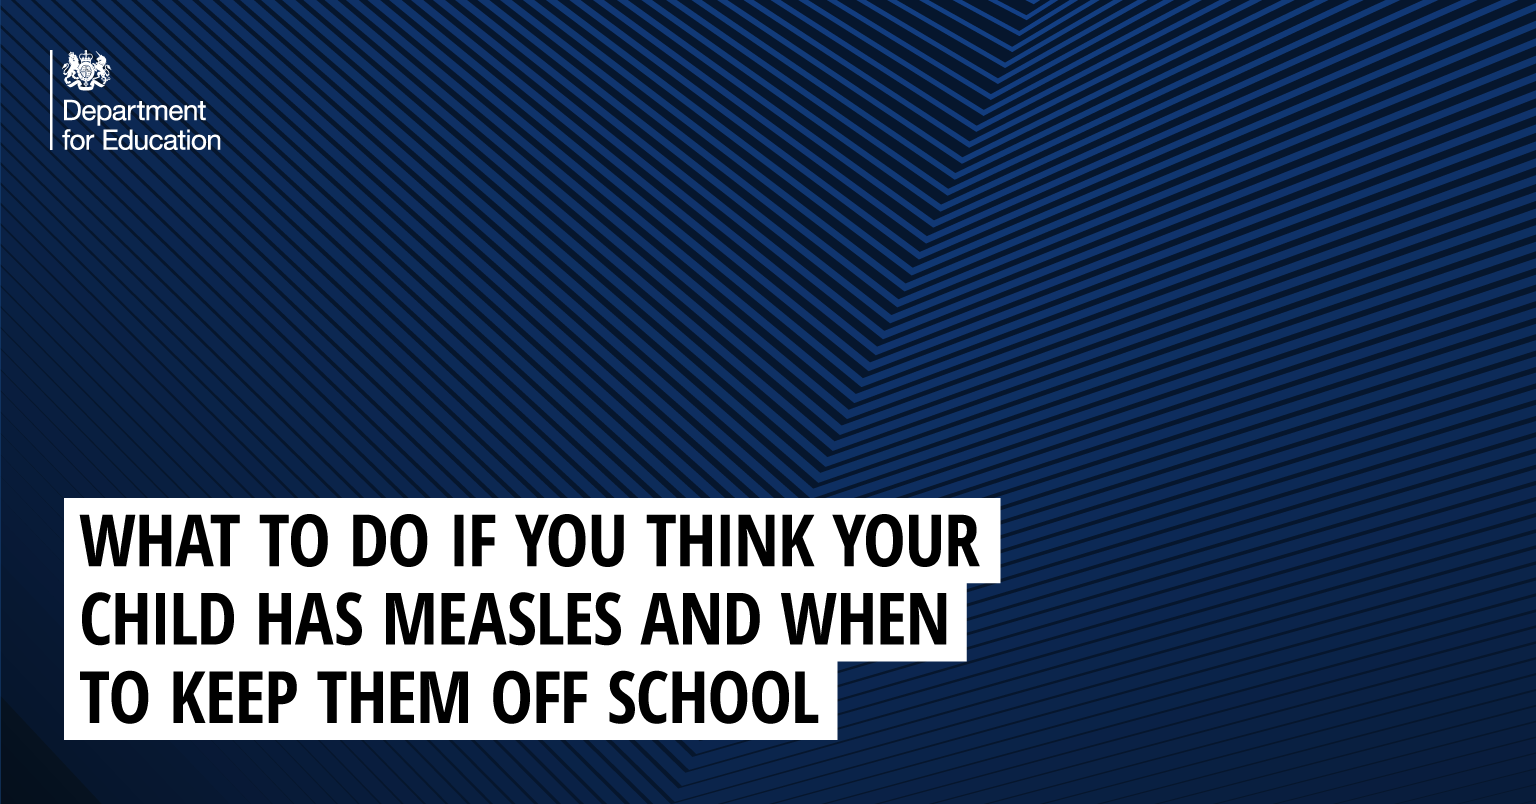 What to do if you think your child has measles and when to keep them off school